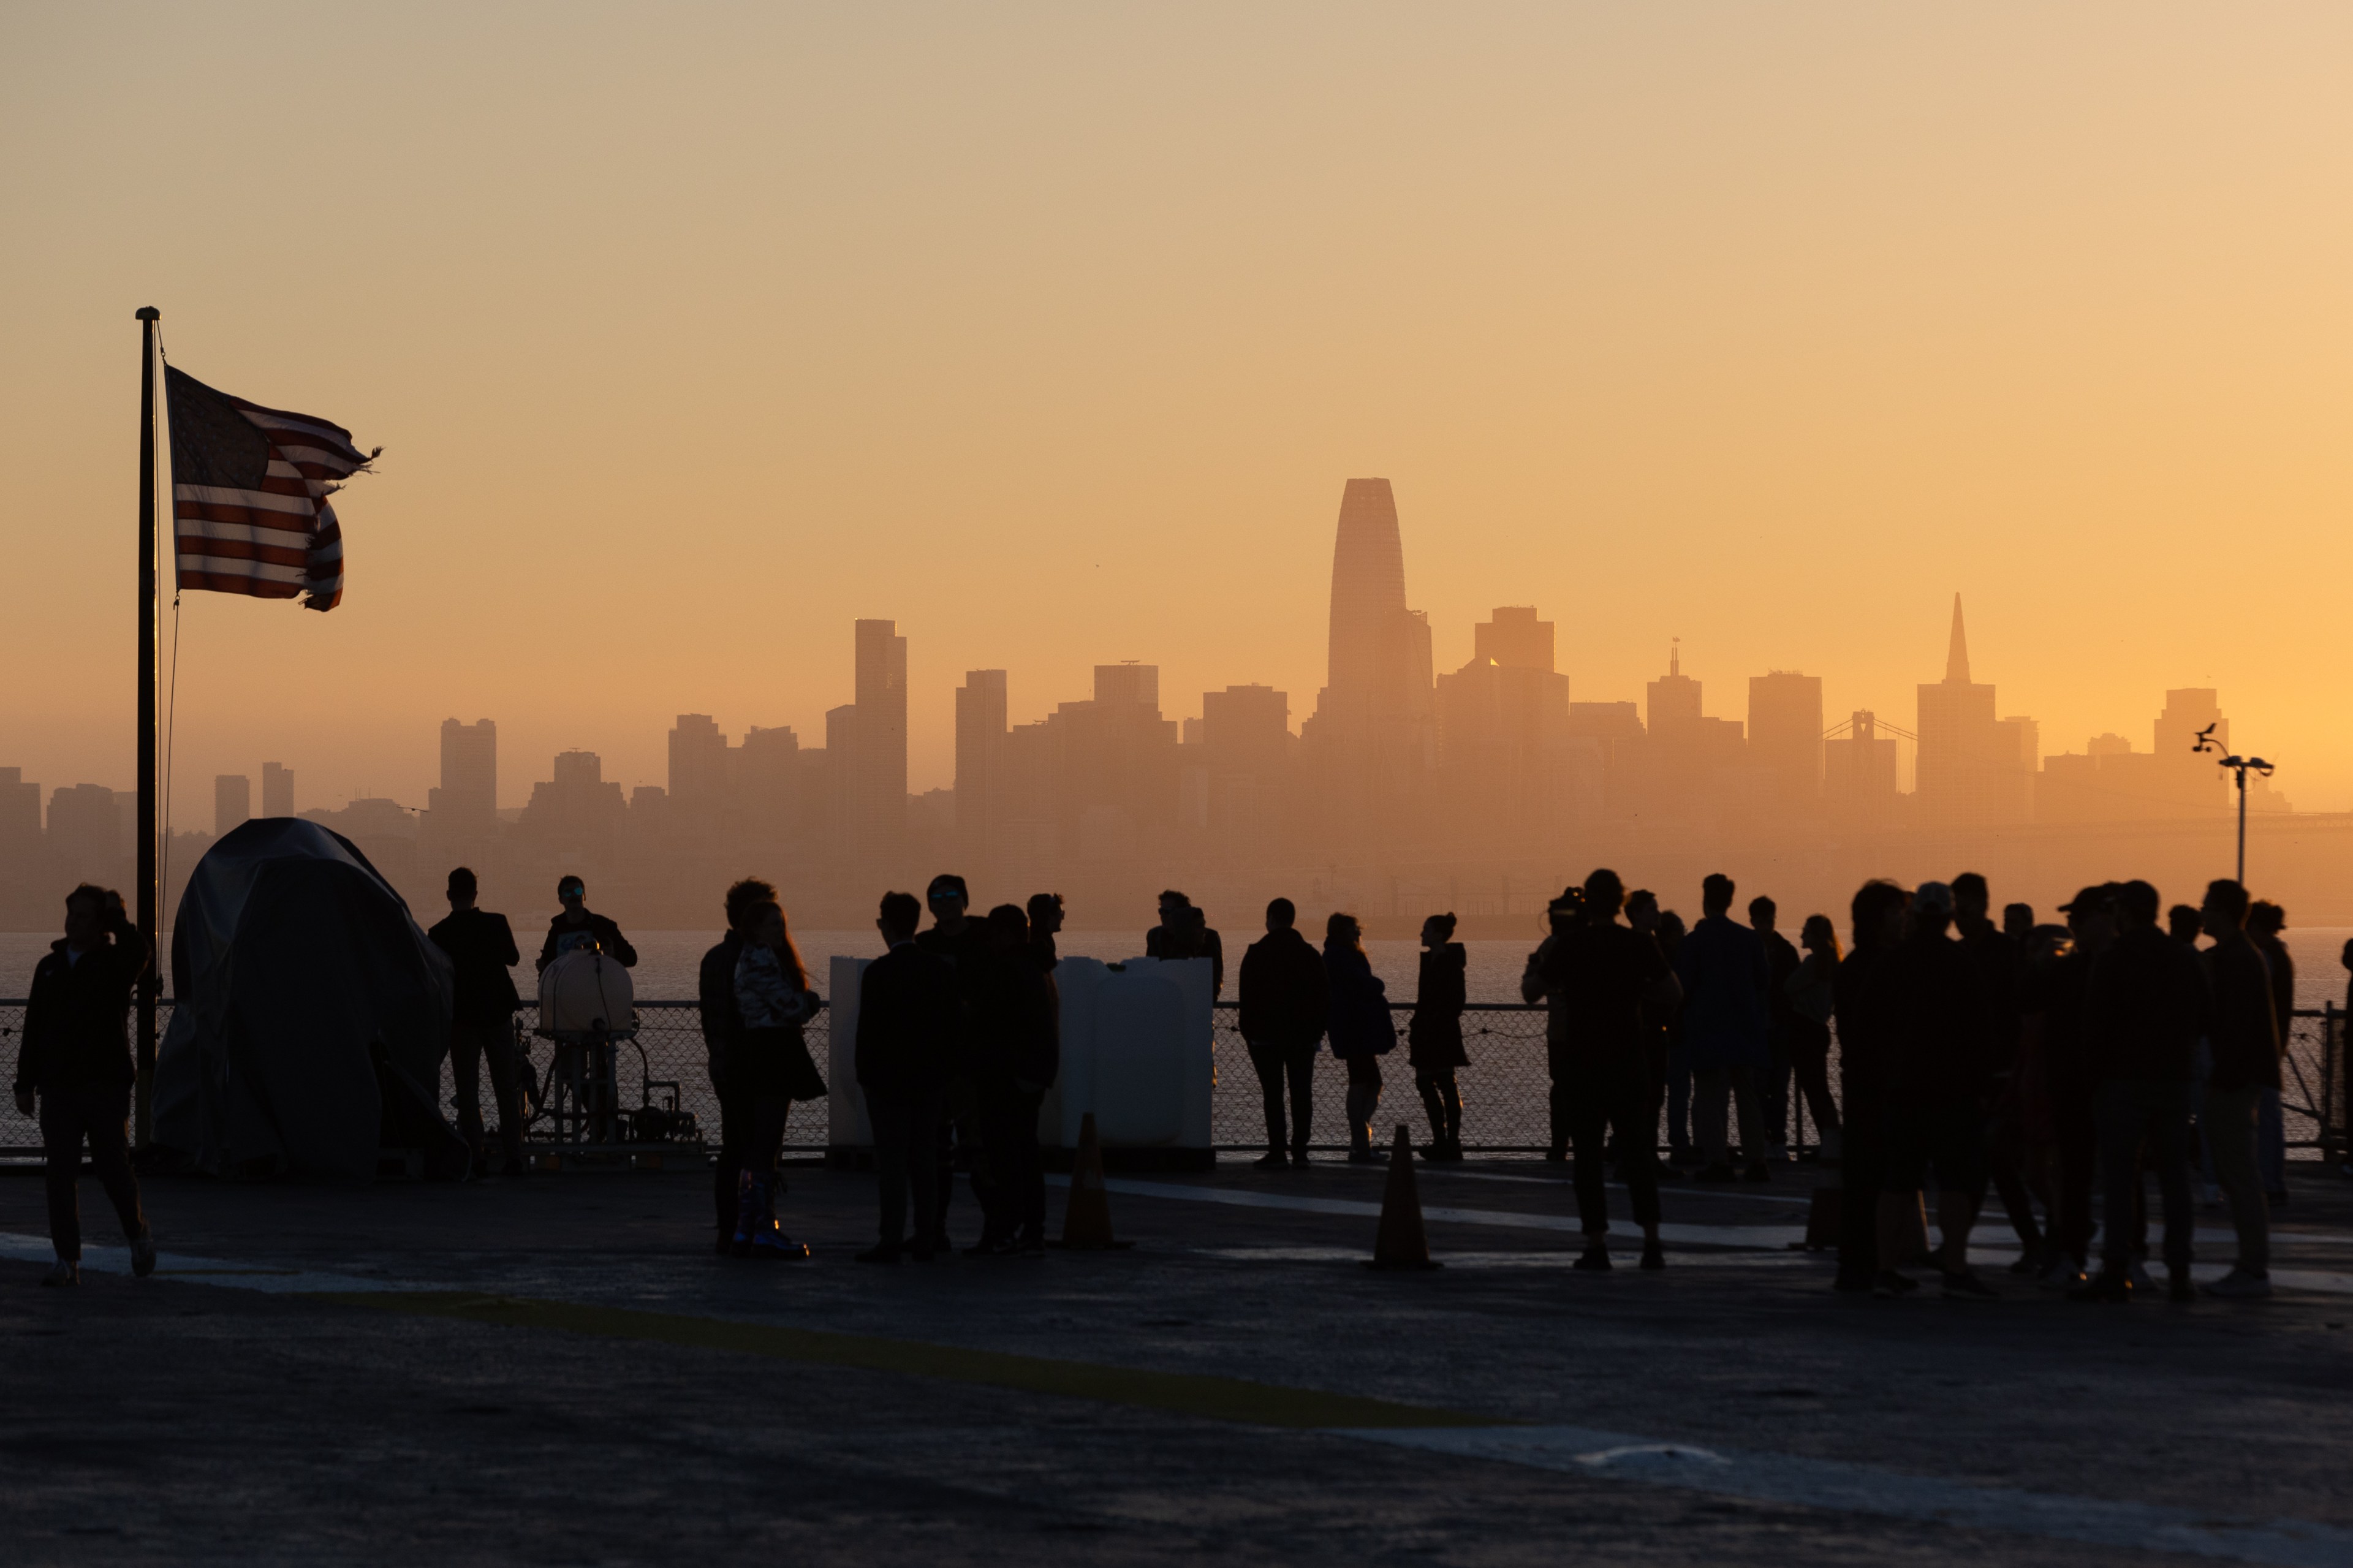 A group of people stand on a dock at sunset, silhouetted against a hazy city skyline. An American flag waves in the breeze on the left side of the image.